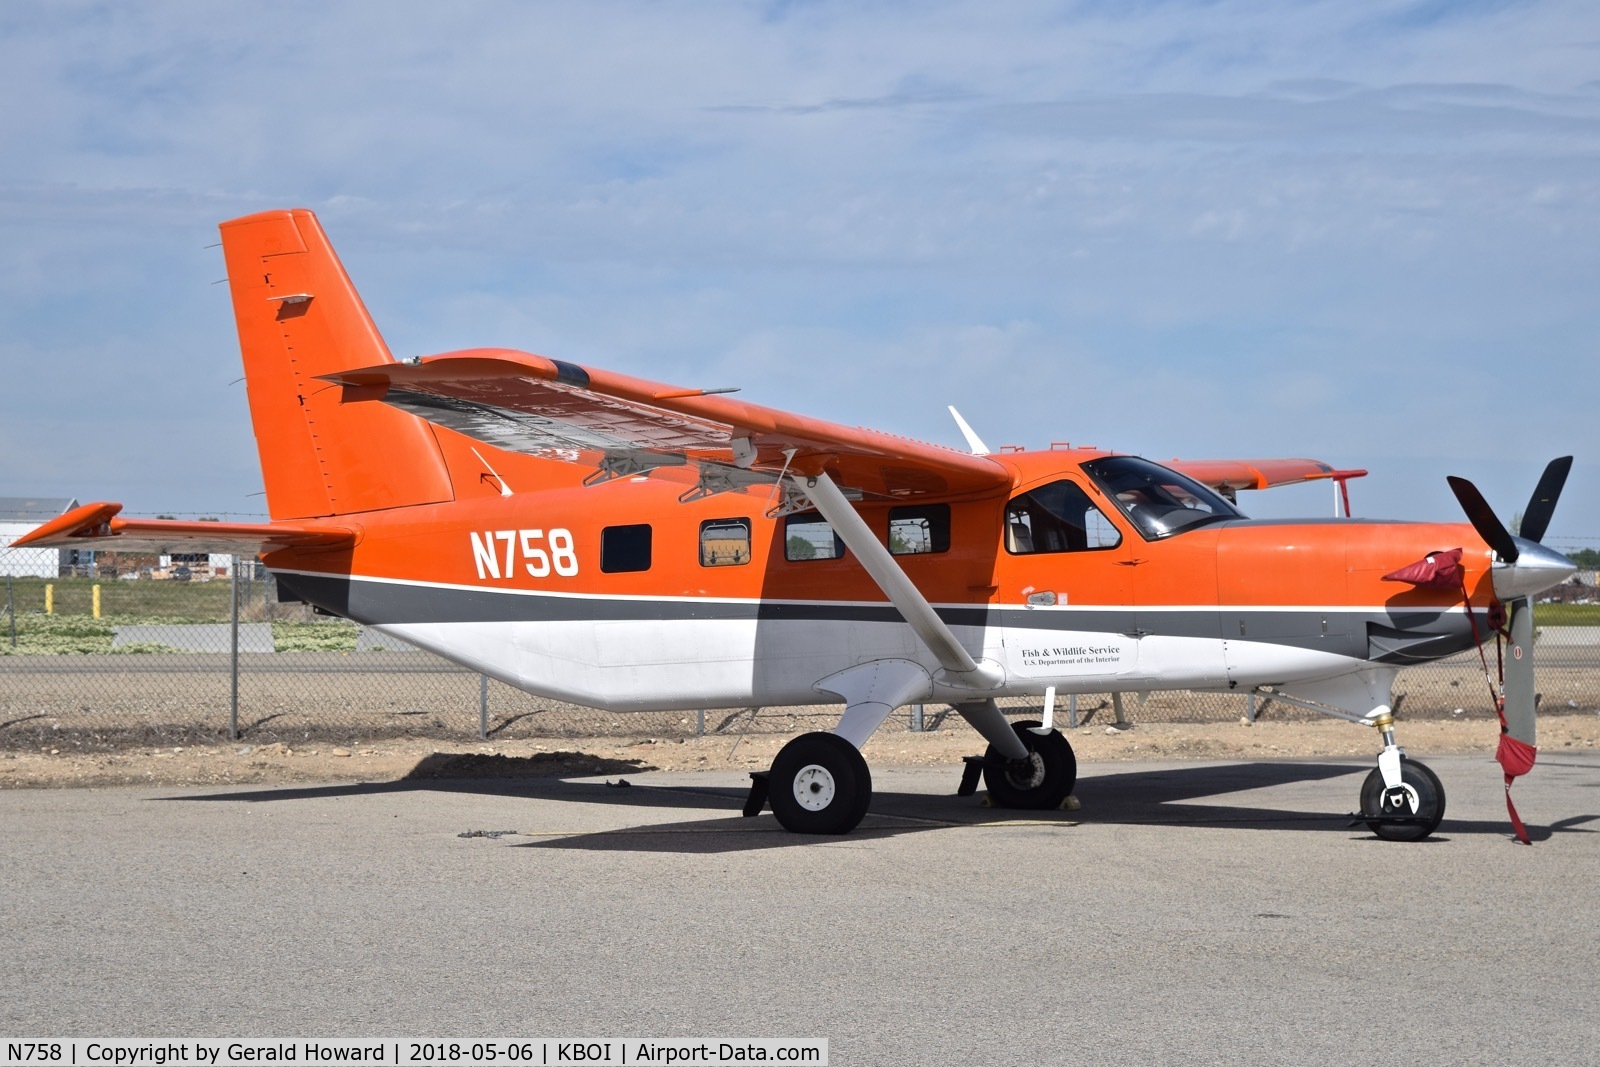 N758, 2010 Quest Kodiak 100 C/N 100-0033, Parked for maintenance, but with out the pontoons.